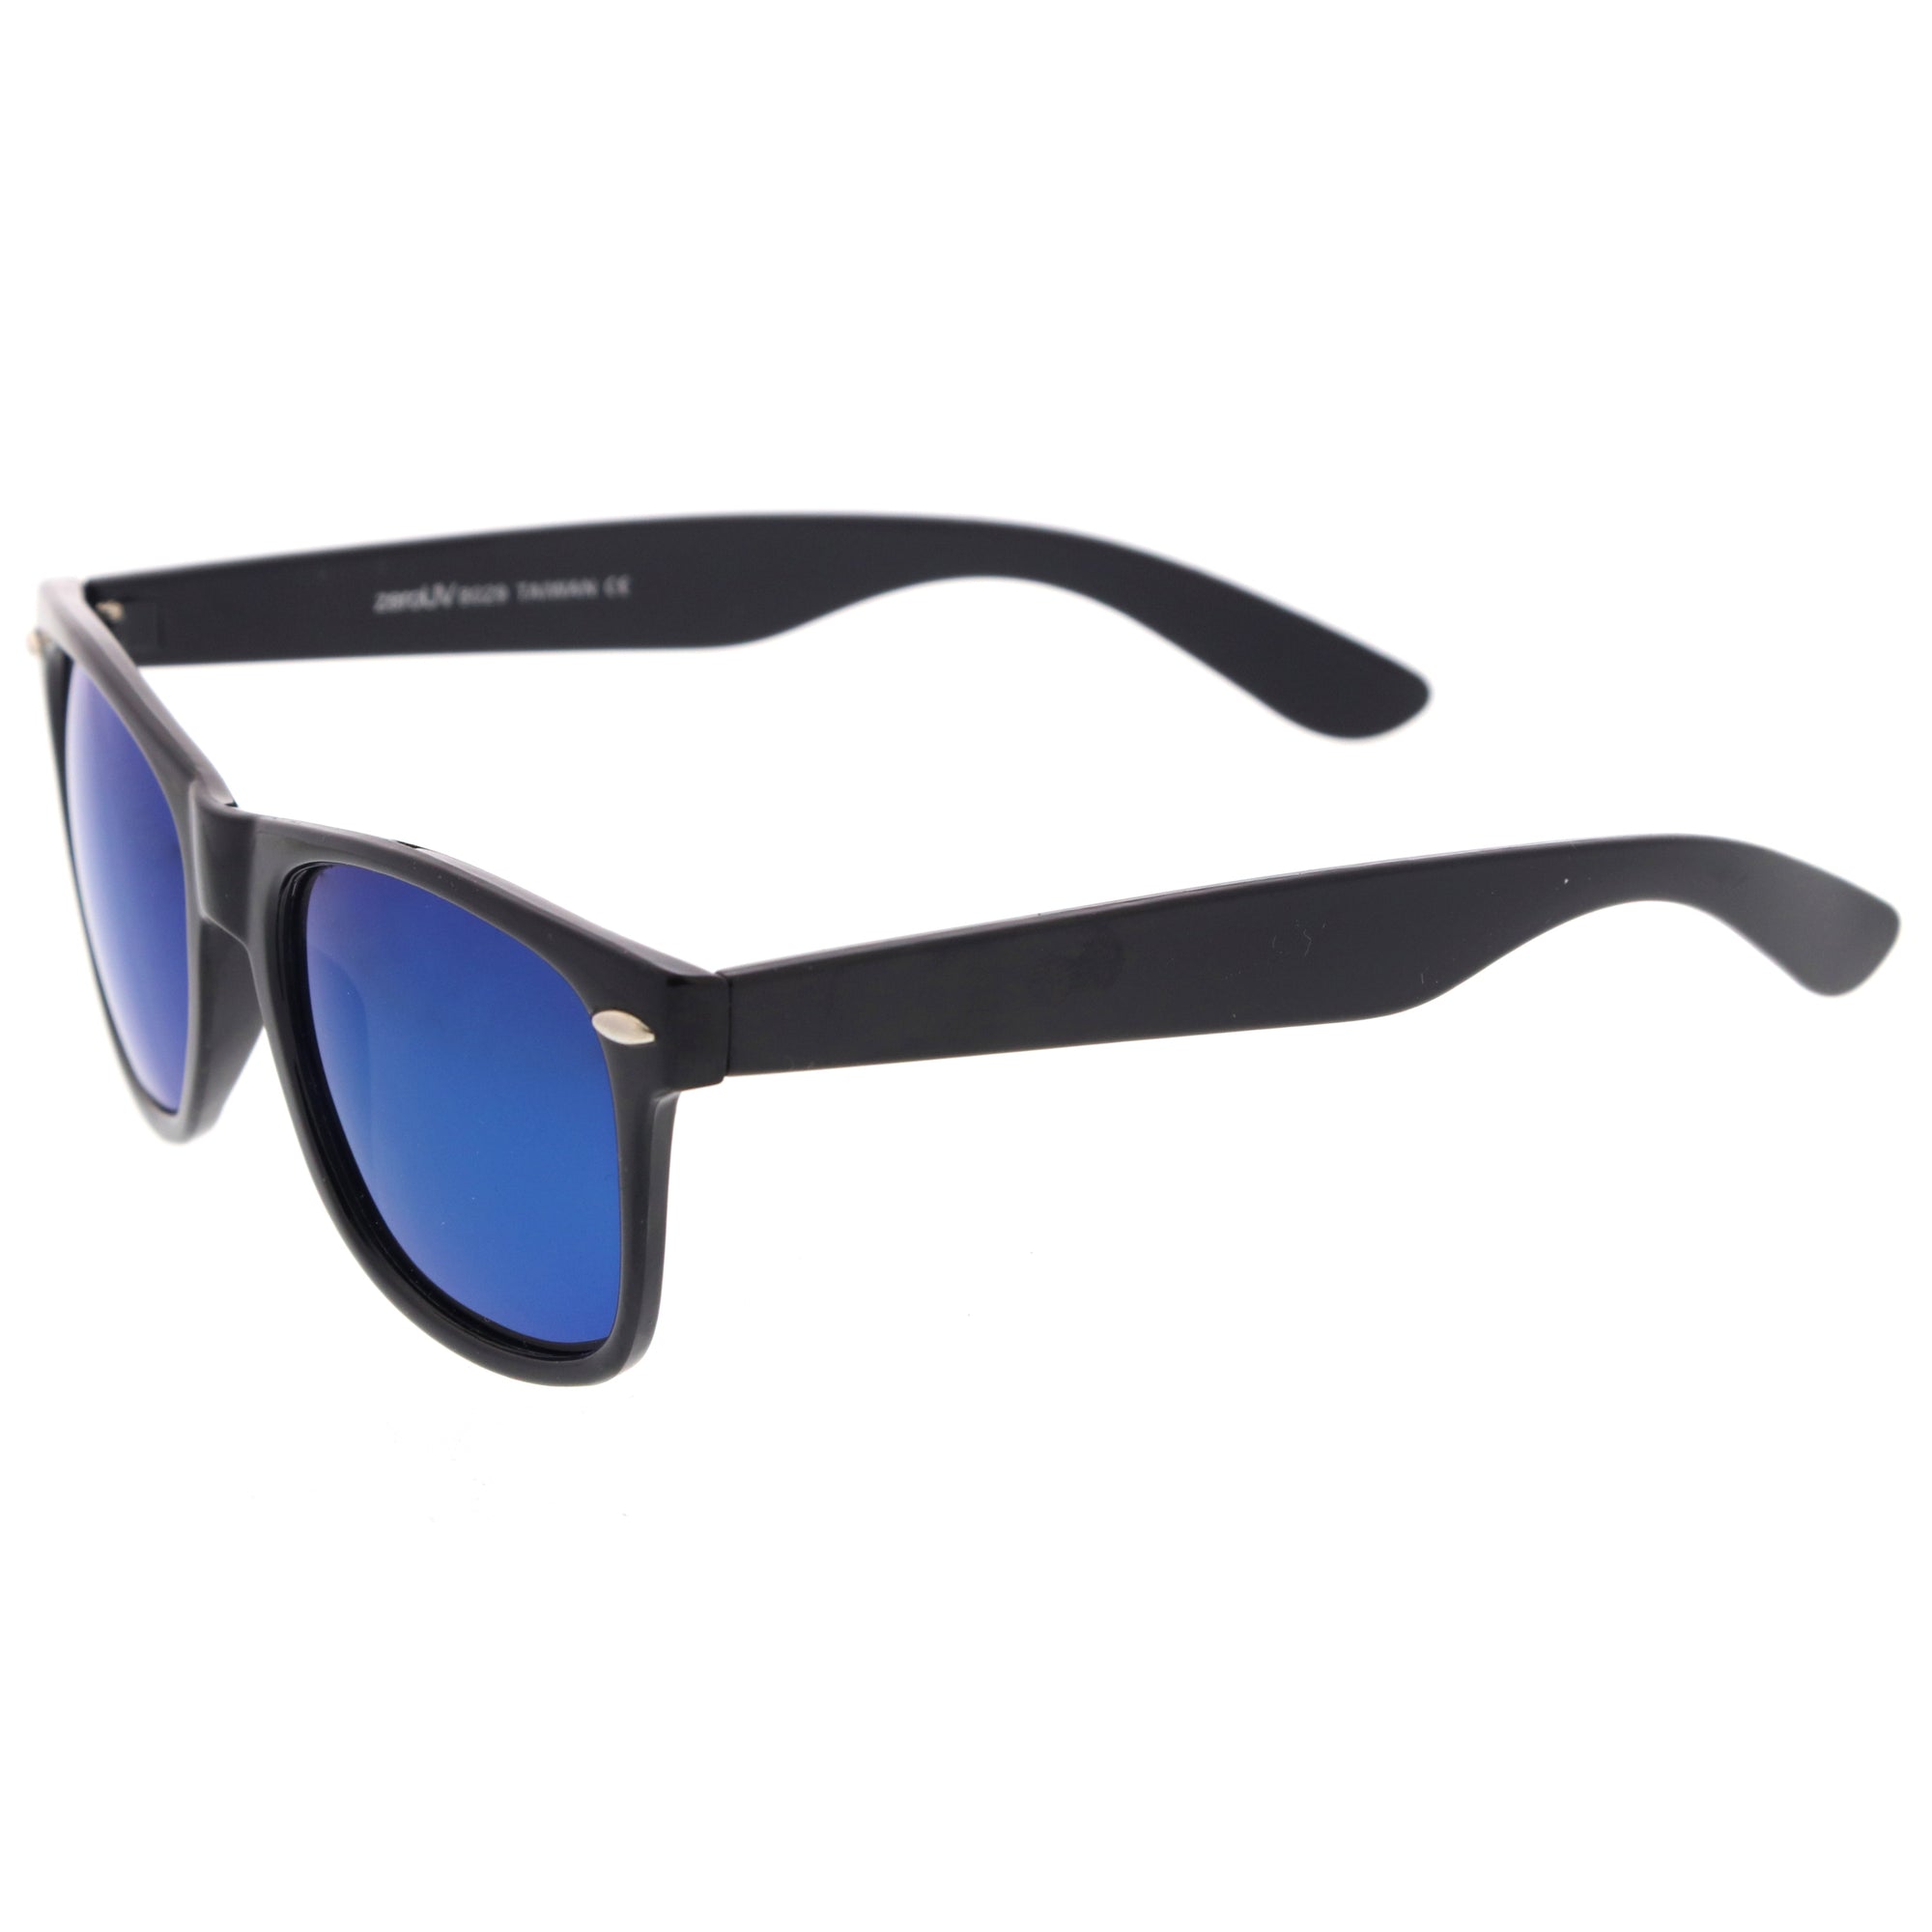 Retro Lifestyle Polarized Mirrored Lens Square Horn Rimmed